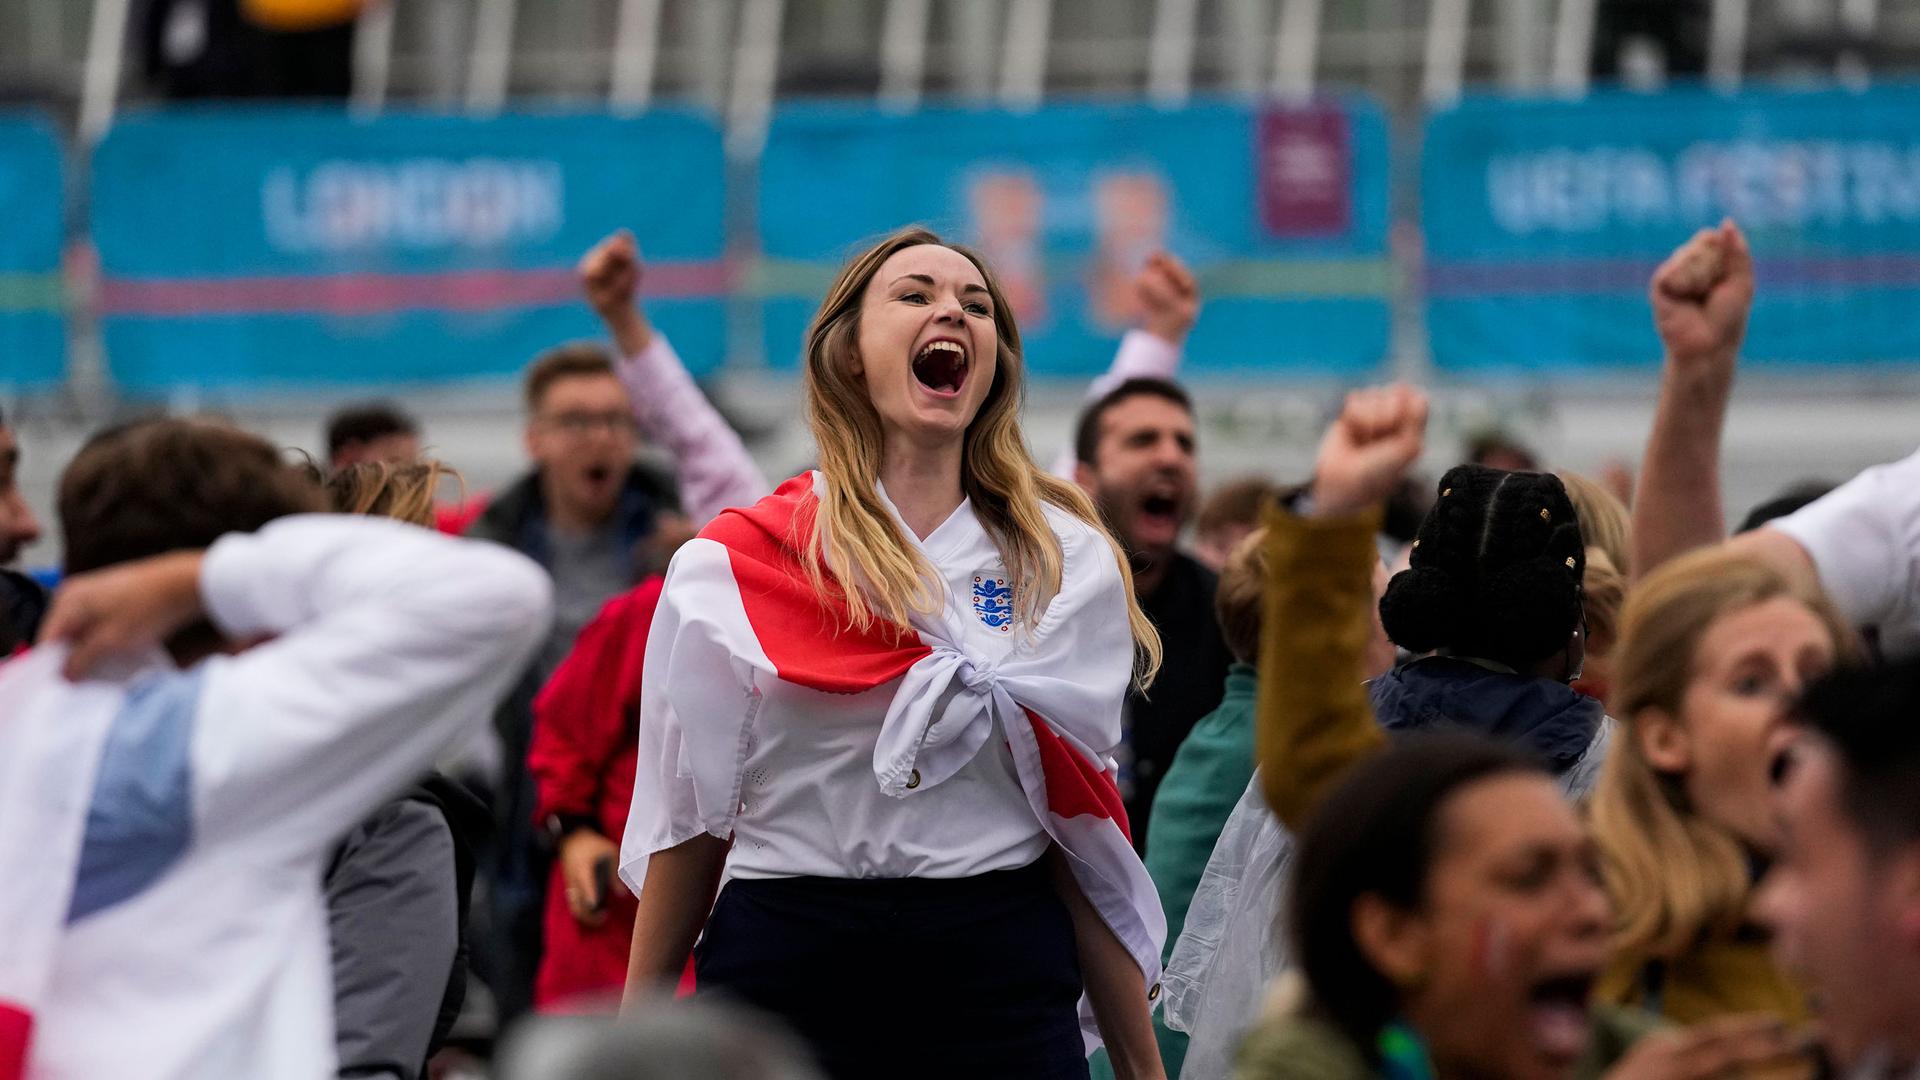 A large crowd of people are shown with a woman in the center of the photograph cheering with her mouth open and an England flag draped on her shoulders.